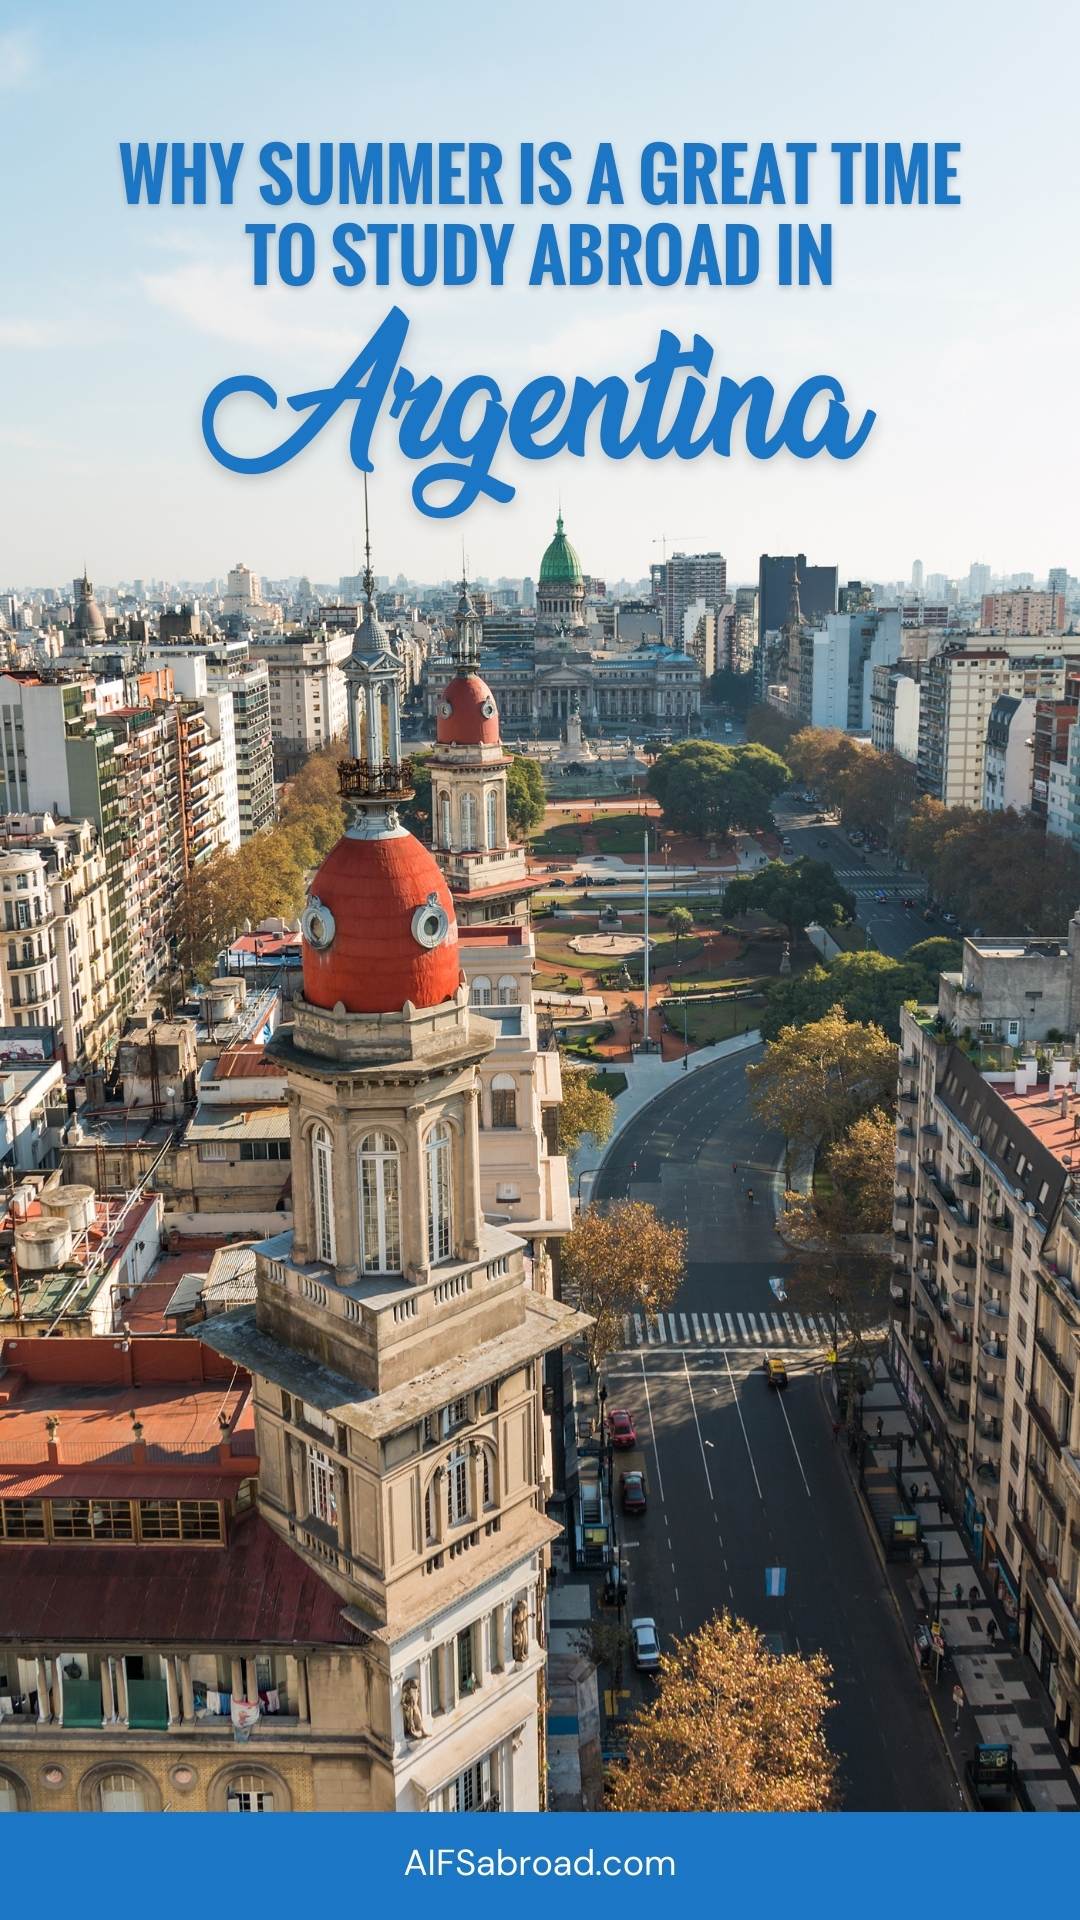 Pin image: View of Buenos Aires cityscape with text overlay saying "why summer is a great time to study abroad in Argentina"